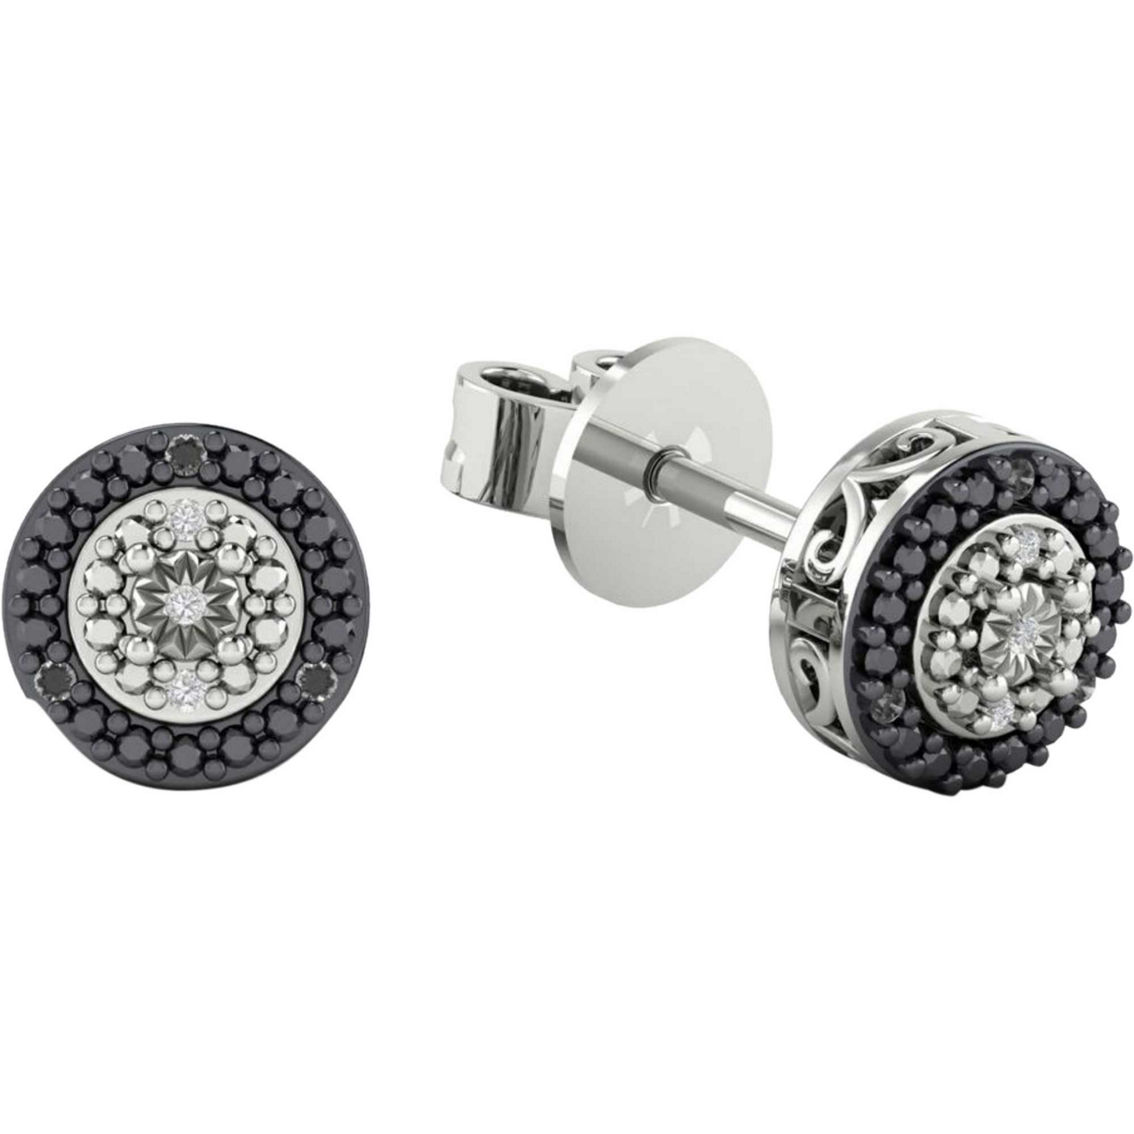 Sterling Silver Diamond Accent Earrings and Pendant Set - Image 3 of 3